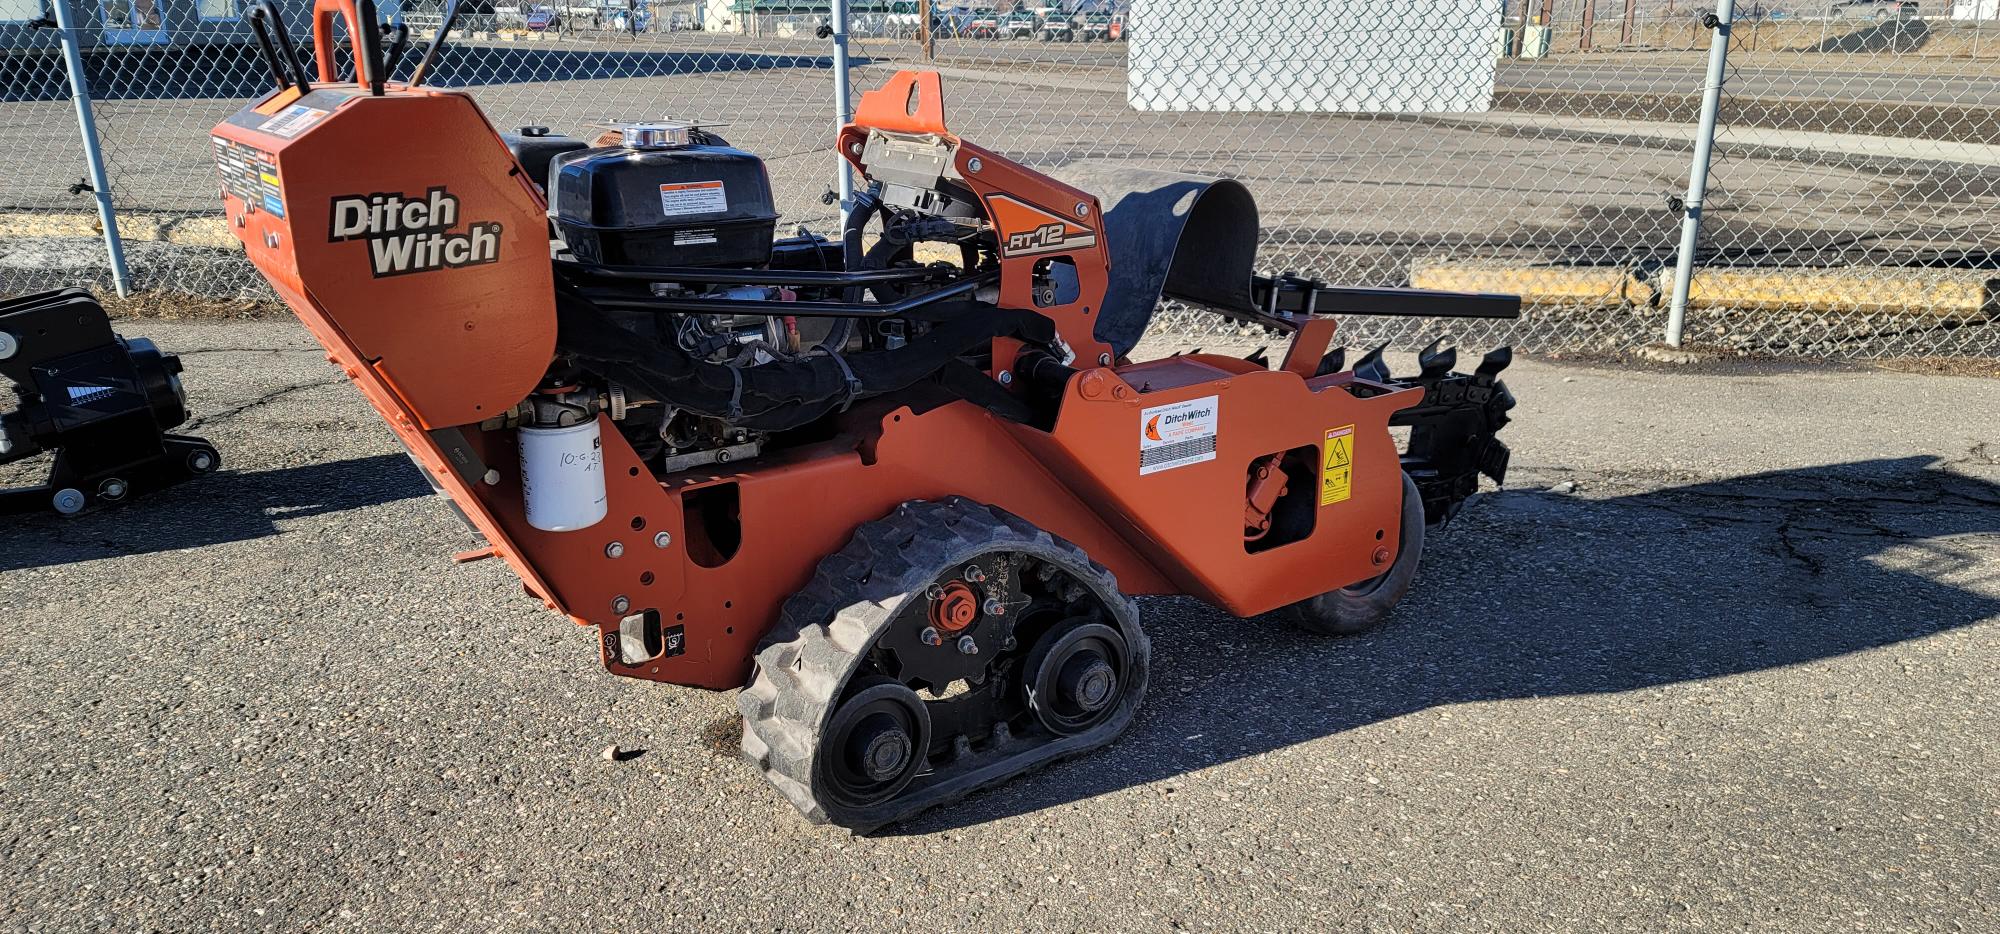 2013 Ditch Witch RT12